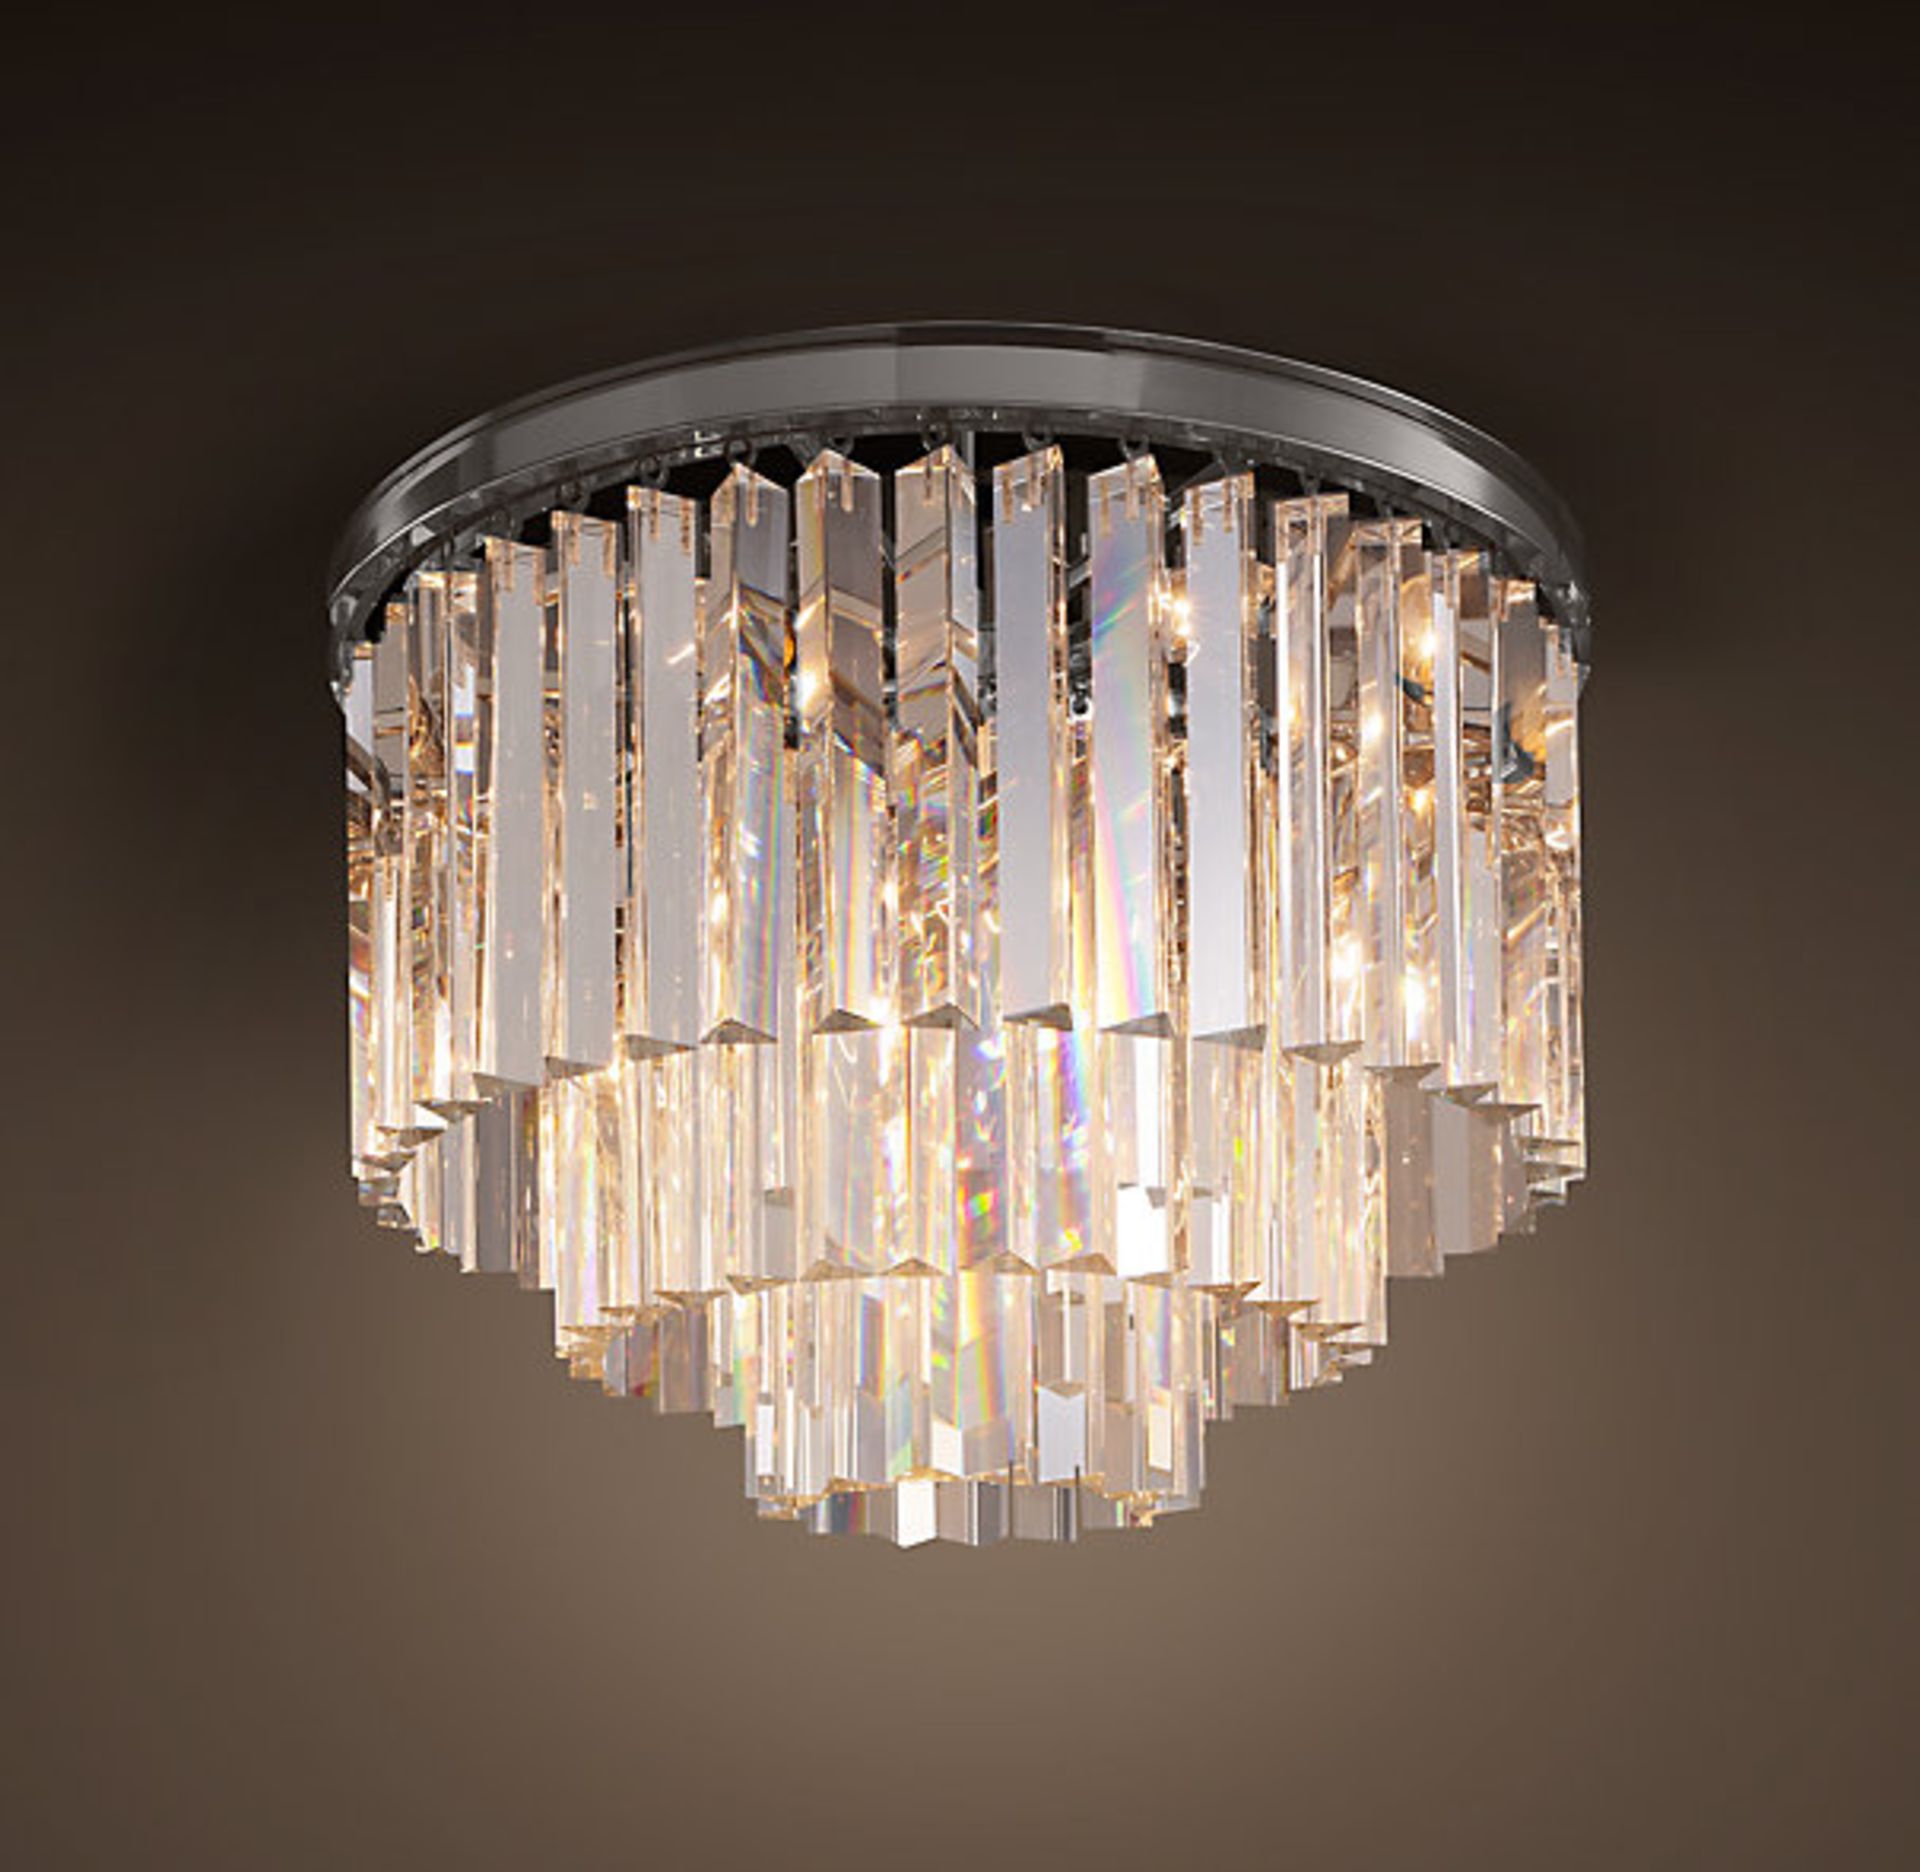 Odeon Mar 3 ring Flush 50cm-Msne&M Blk 50 X 50 X 40cm The Odeon Lighting Collection Is A Modern - Image 2 of 3